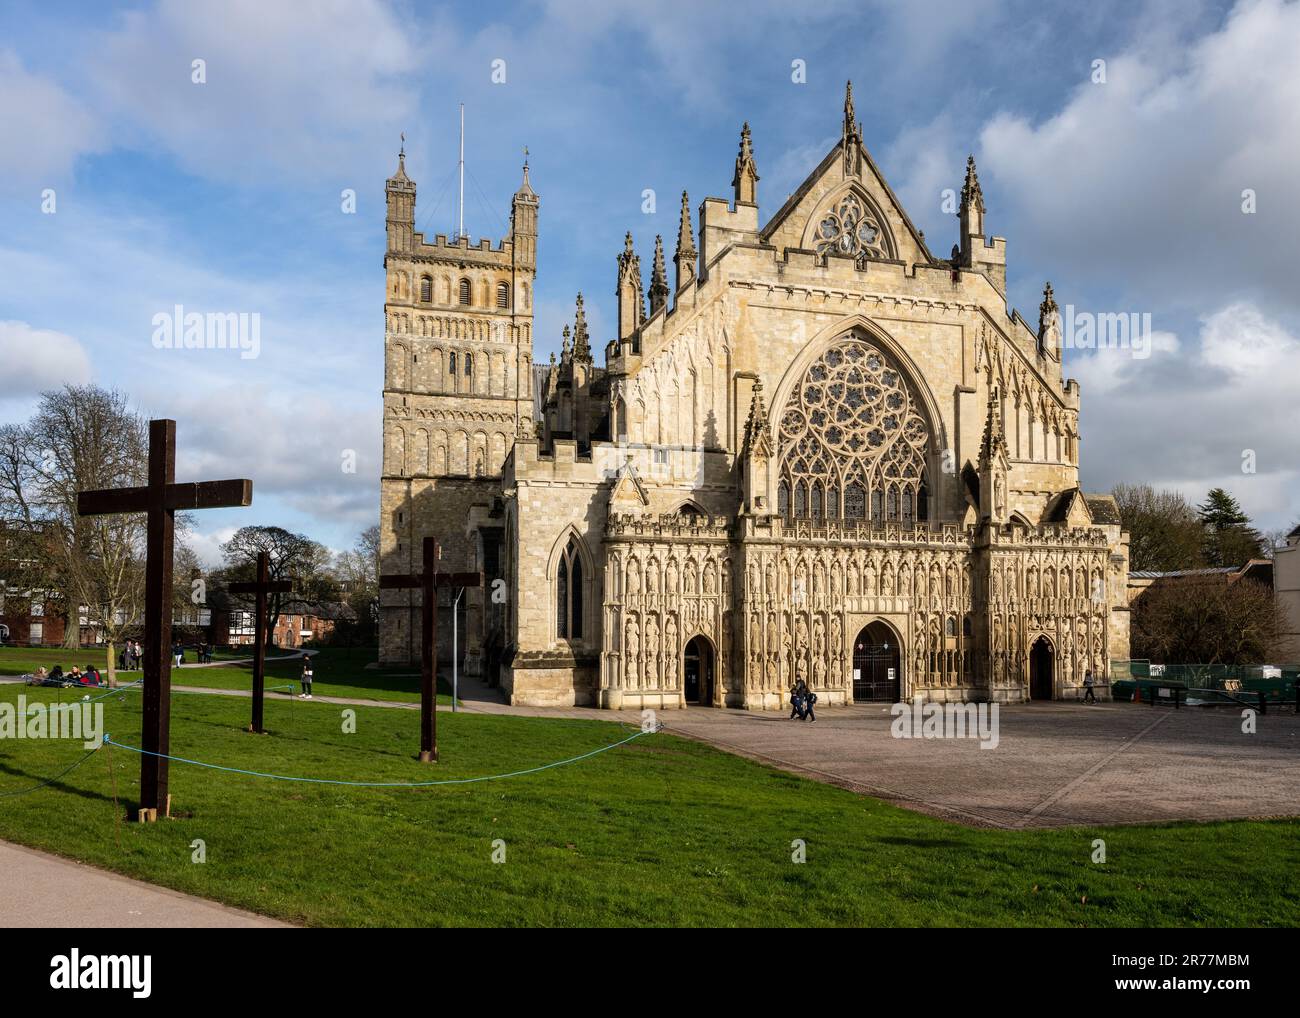 Sun shines on the ornate gothic west face and Norman north tower of Exeter Cathedral in Devon. Stock Photo